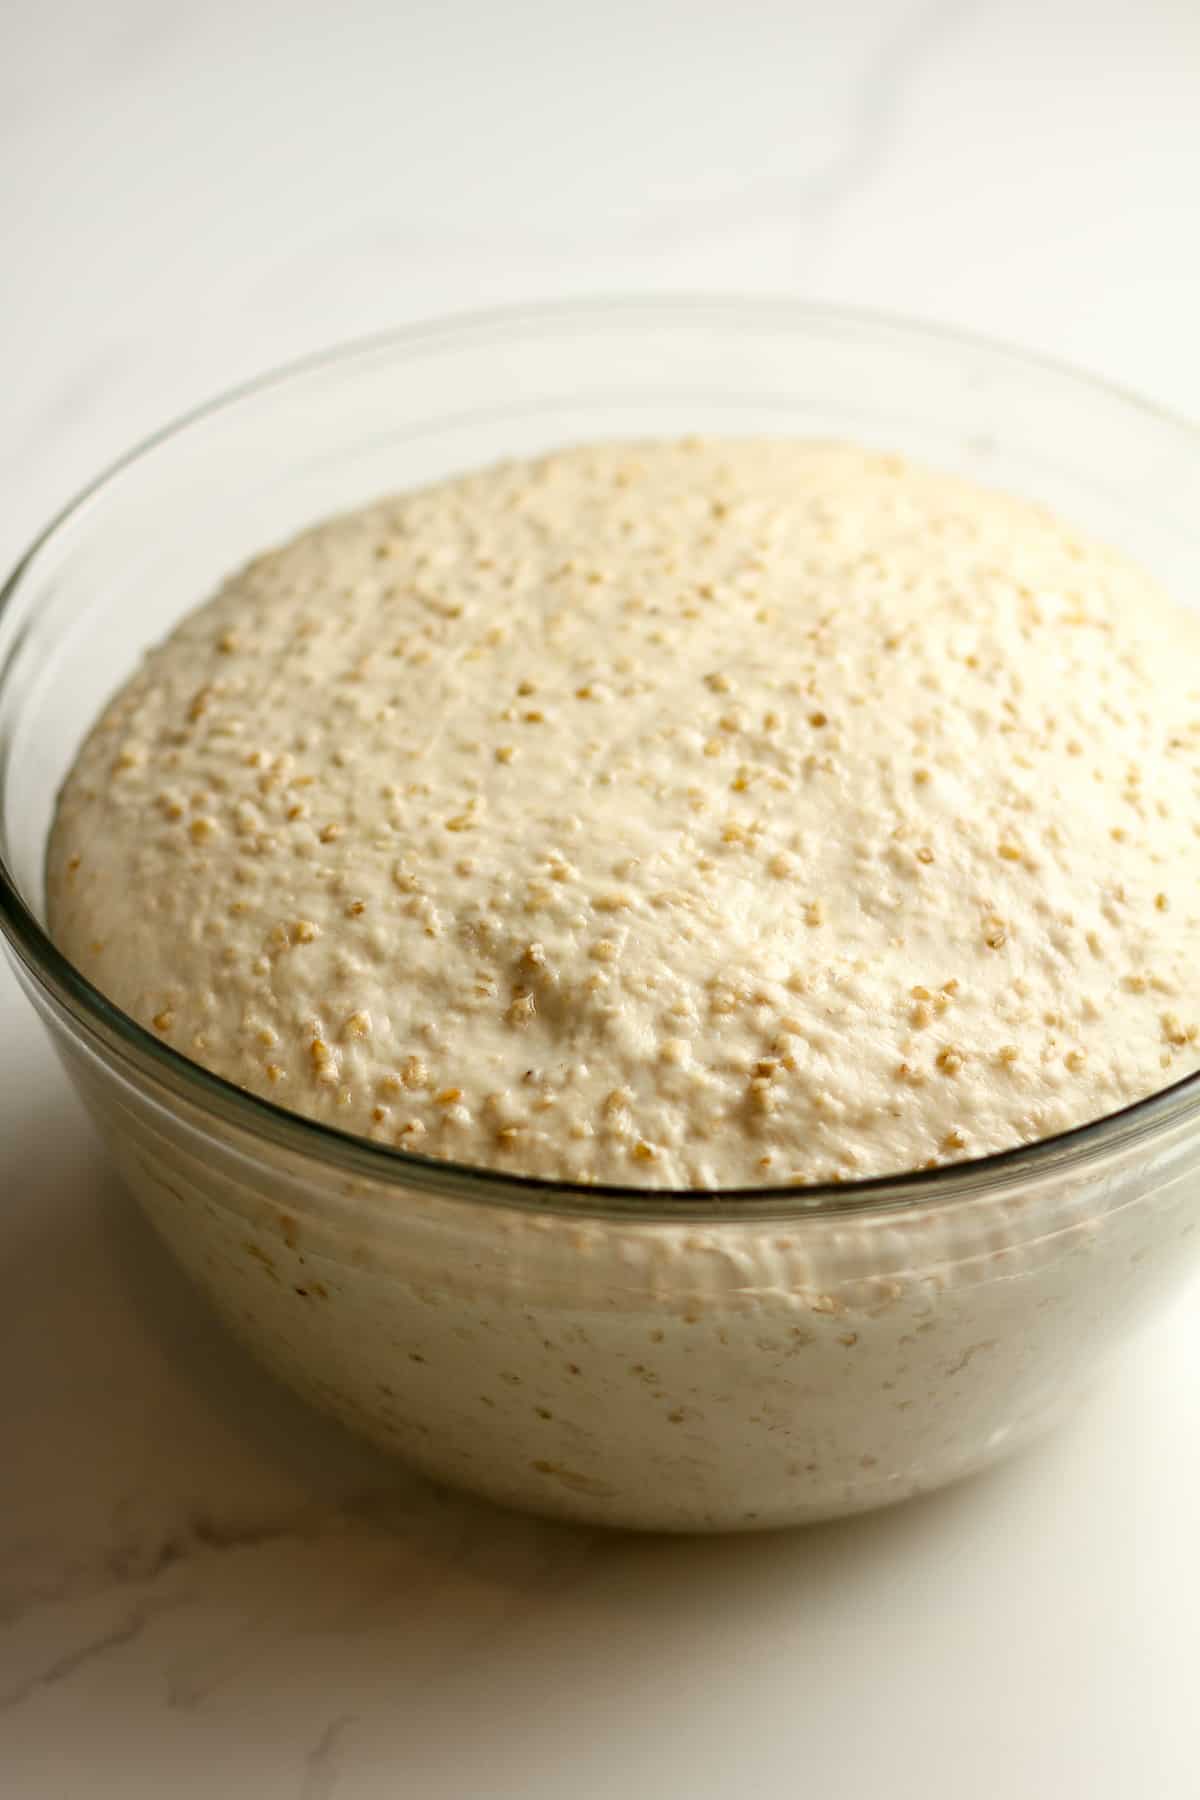 Side view of the raised bread dough.